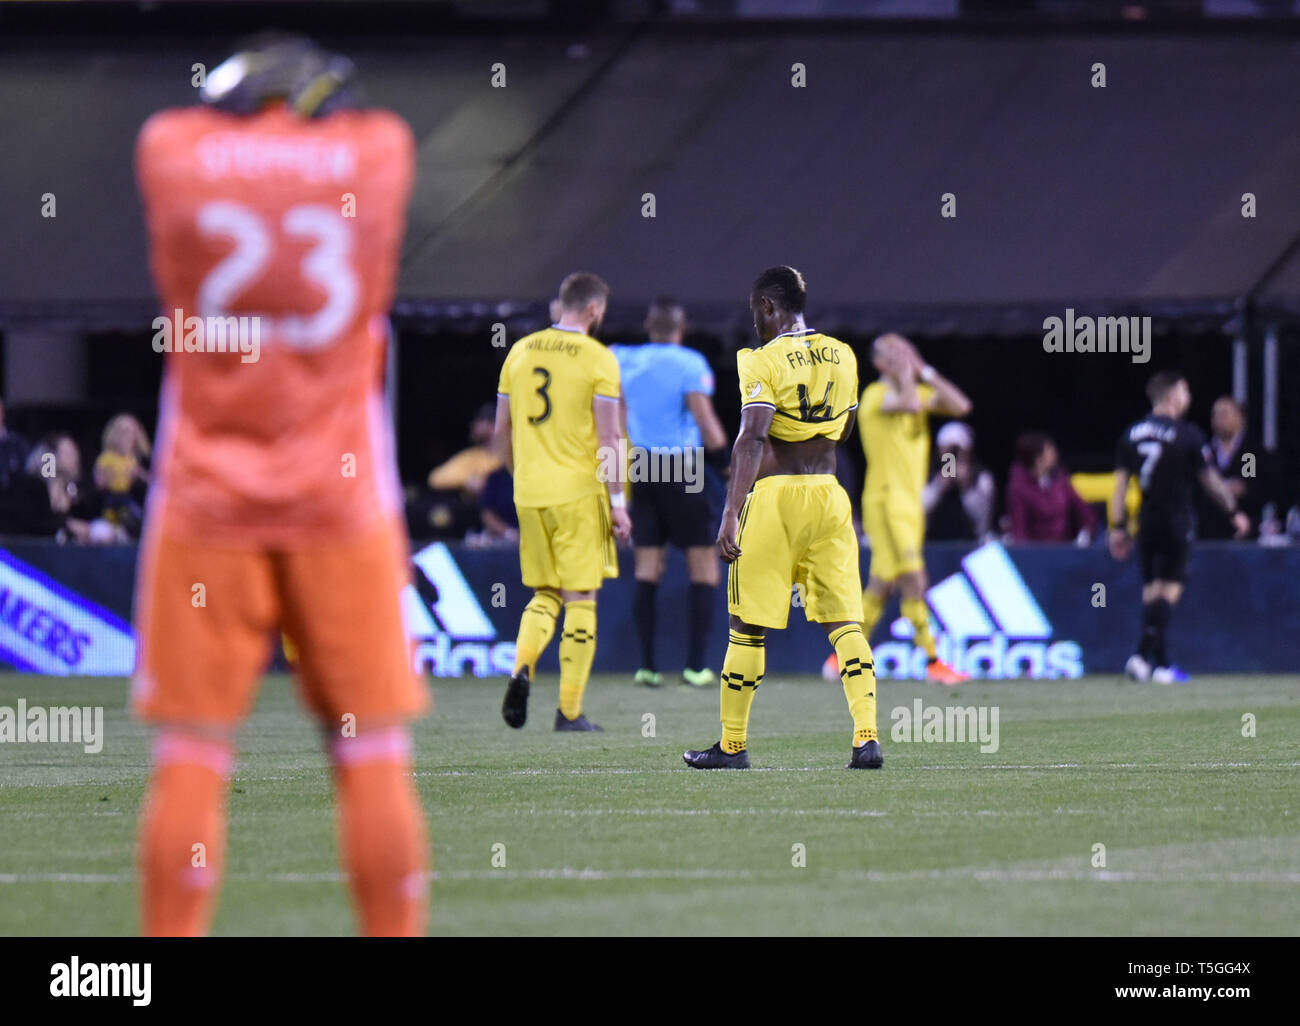 Columbus, OH, USA. 24th Apr, 2019. April 24, 2019: Columbus Crew goalkeeper Zack Steffen (23) and Columbus Crew defender Waylon Francis (14) react to a missed goal during the MLS match between DC United and Columbus Crew SC at Mapfre Stadium in Columbus, Ohio. Austyn McFadden/ZUMA Credit: Austyn McFadden/ZUMA Wire/Alamy Live News Stock Photo